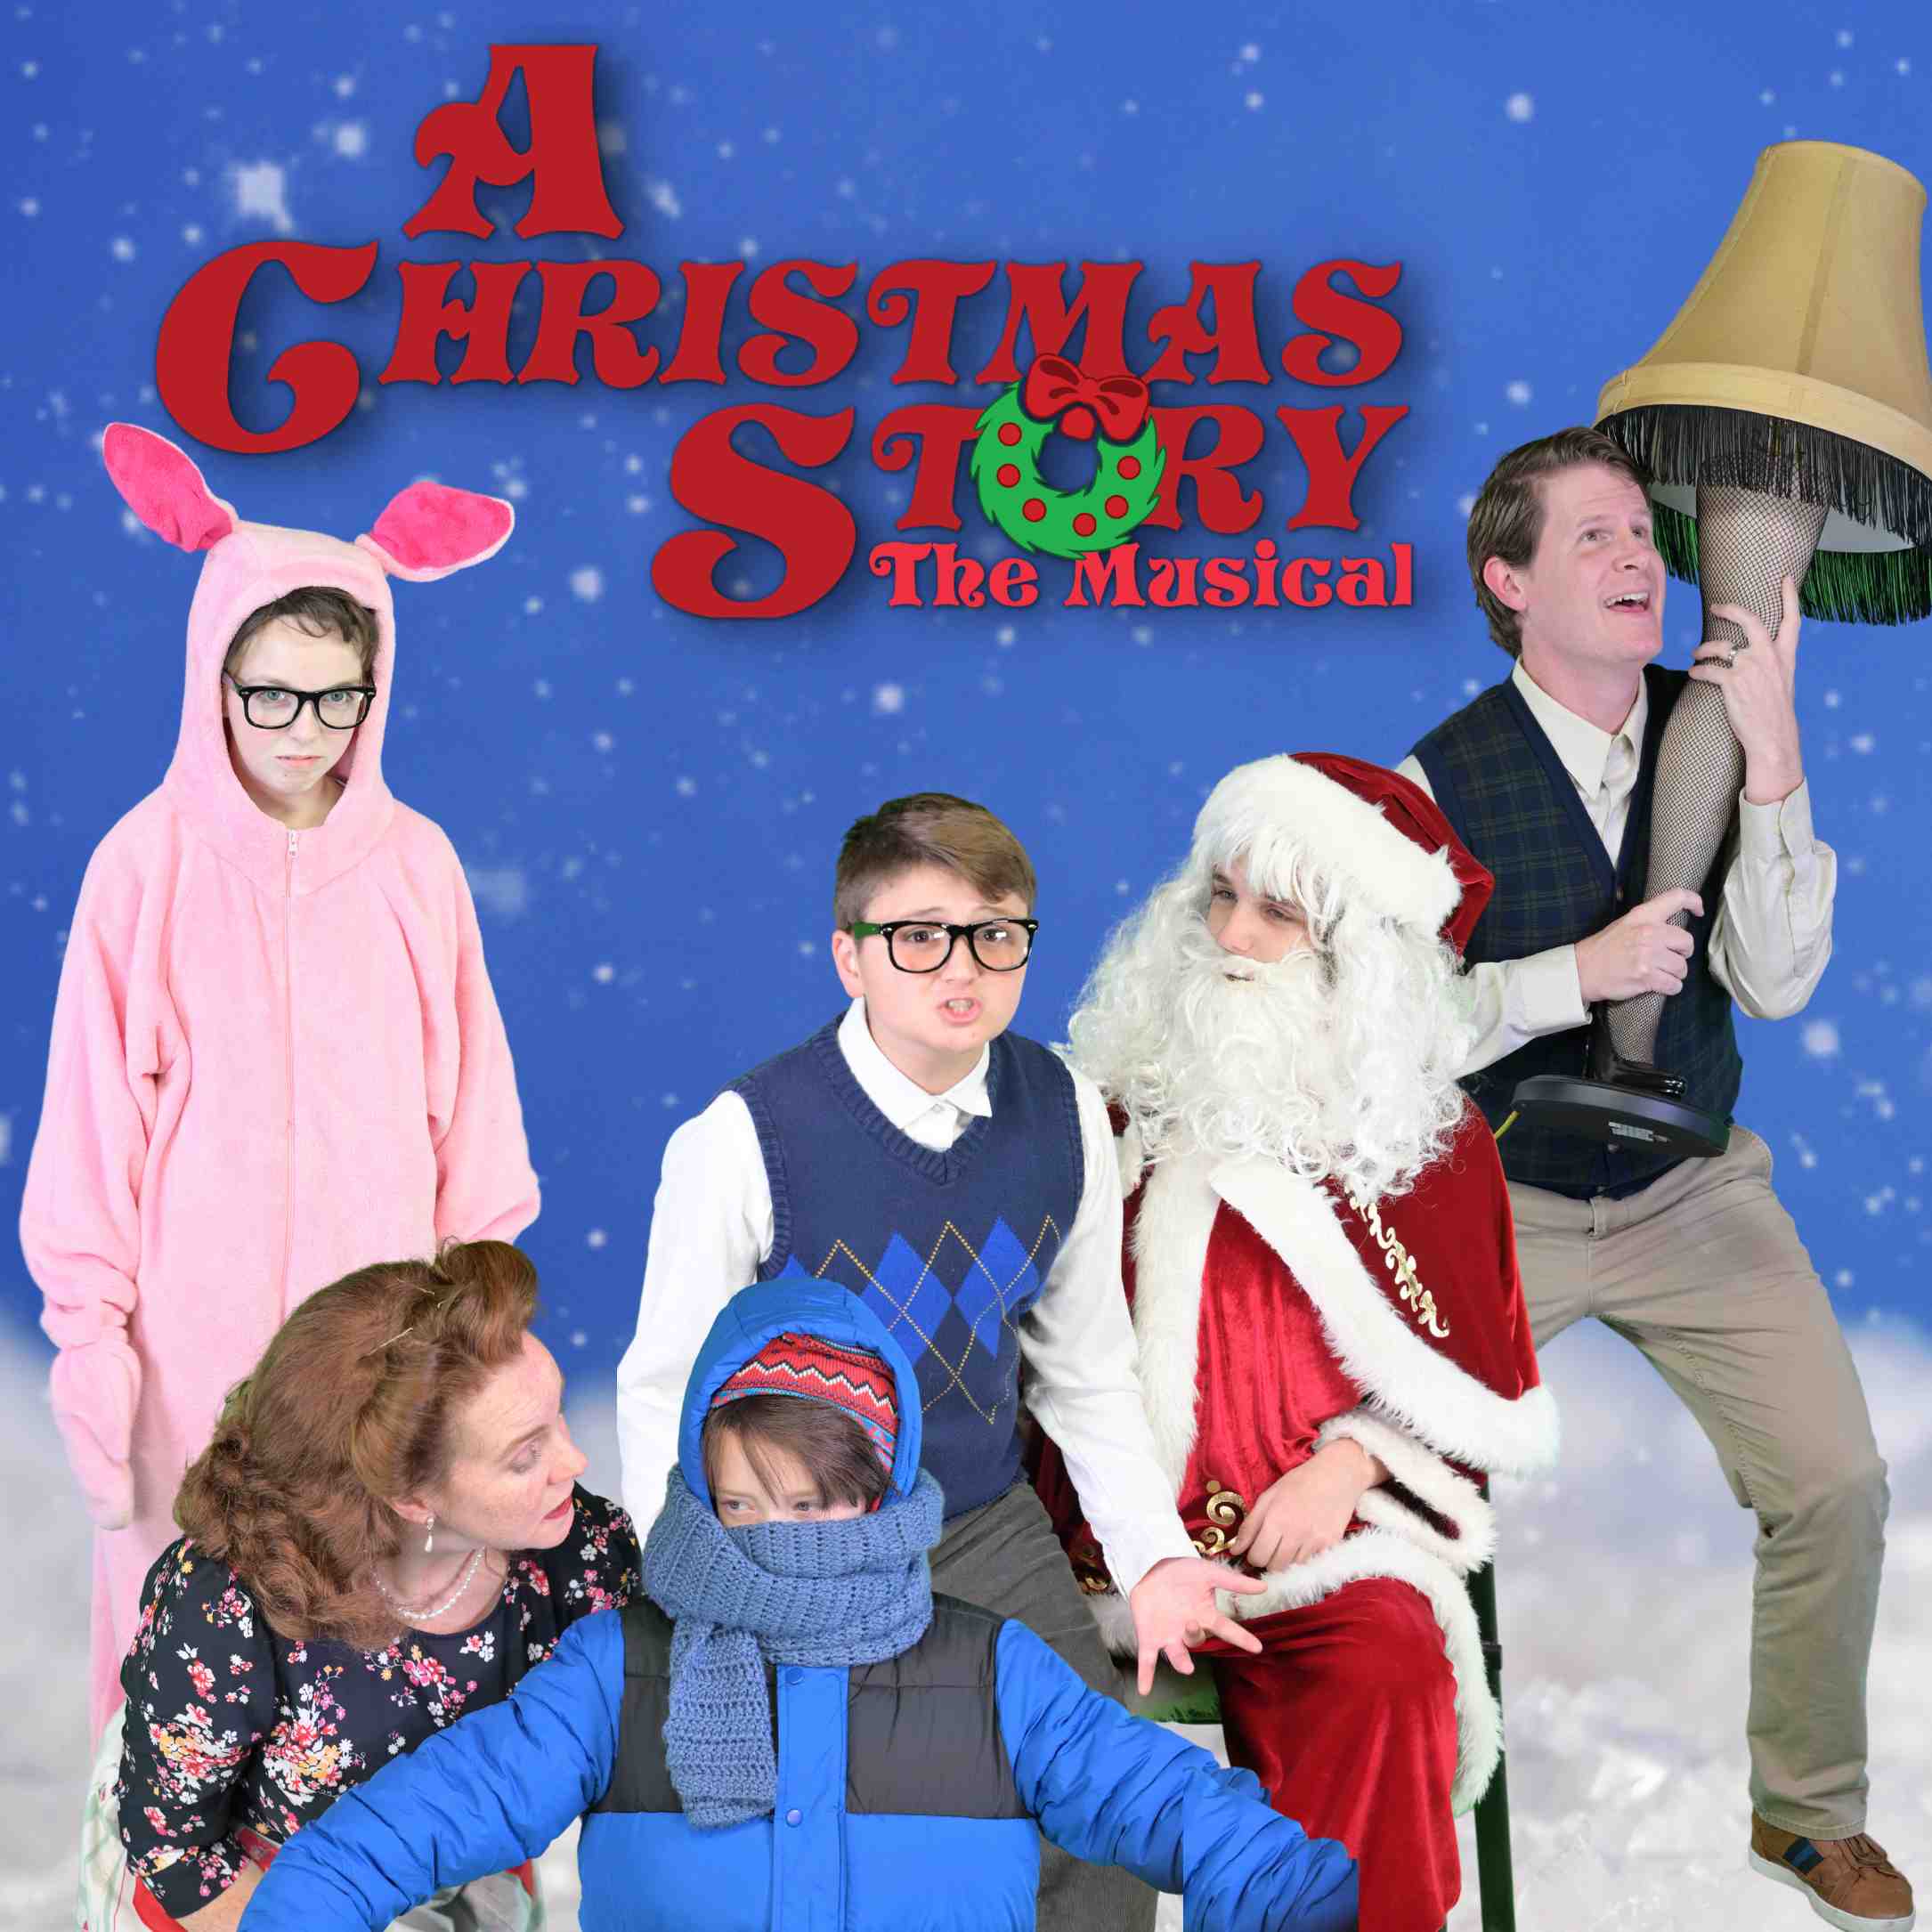 A Christmas Story The Musical arrives at Town Theatre Who's On The Move